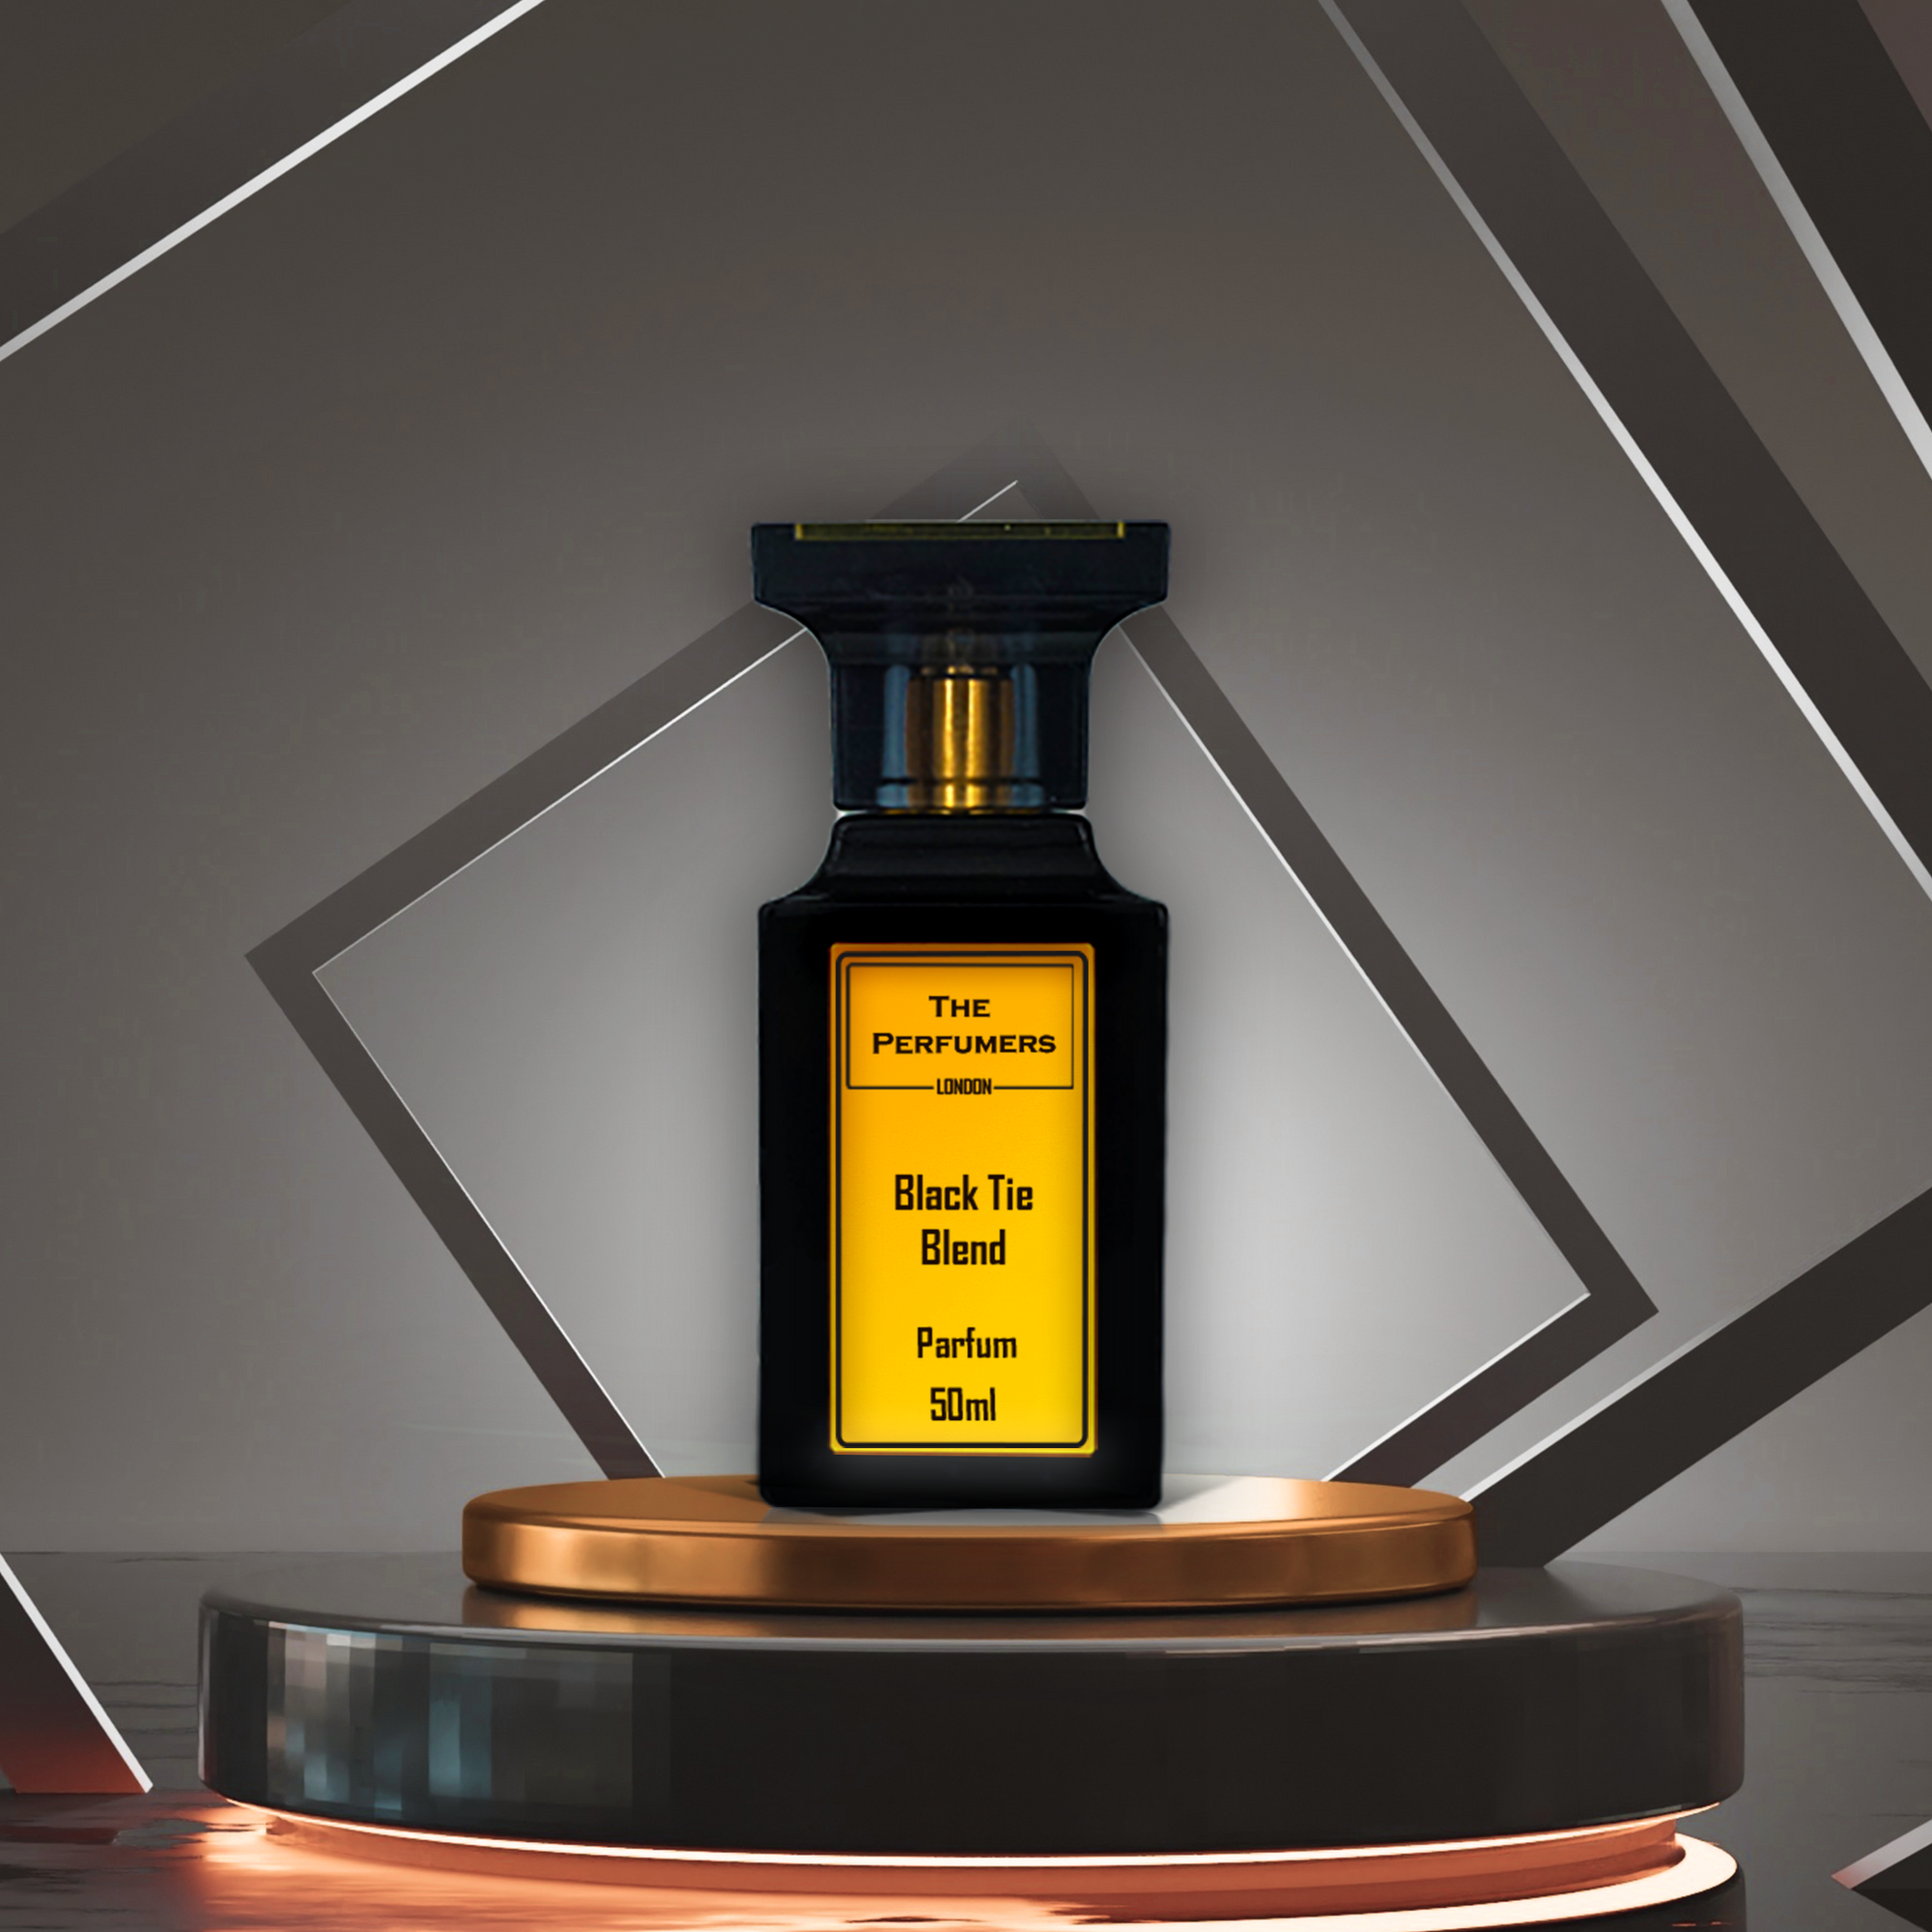 YSL Tuxedo - A classic and elegant fragrance inspired by the sophistication of a tuxedo suit